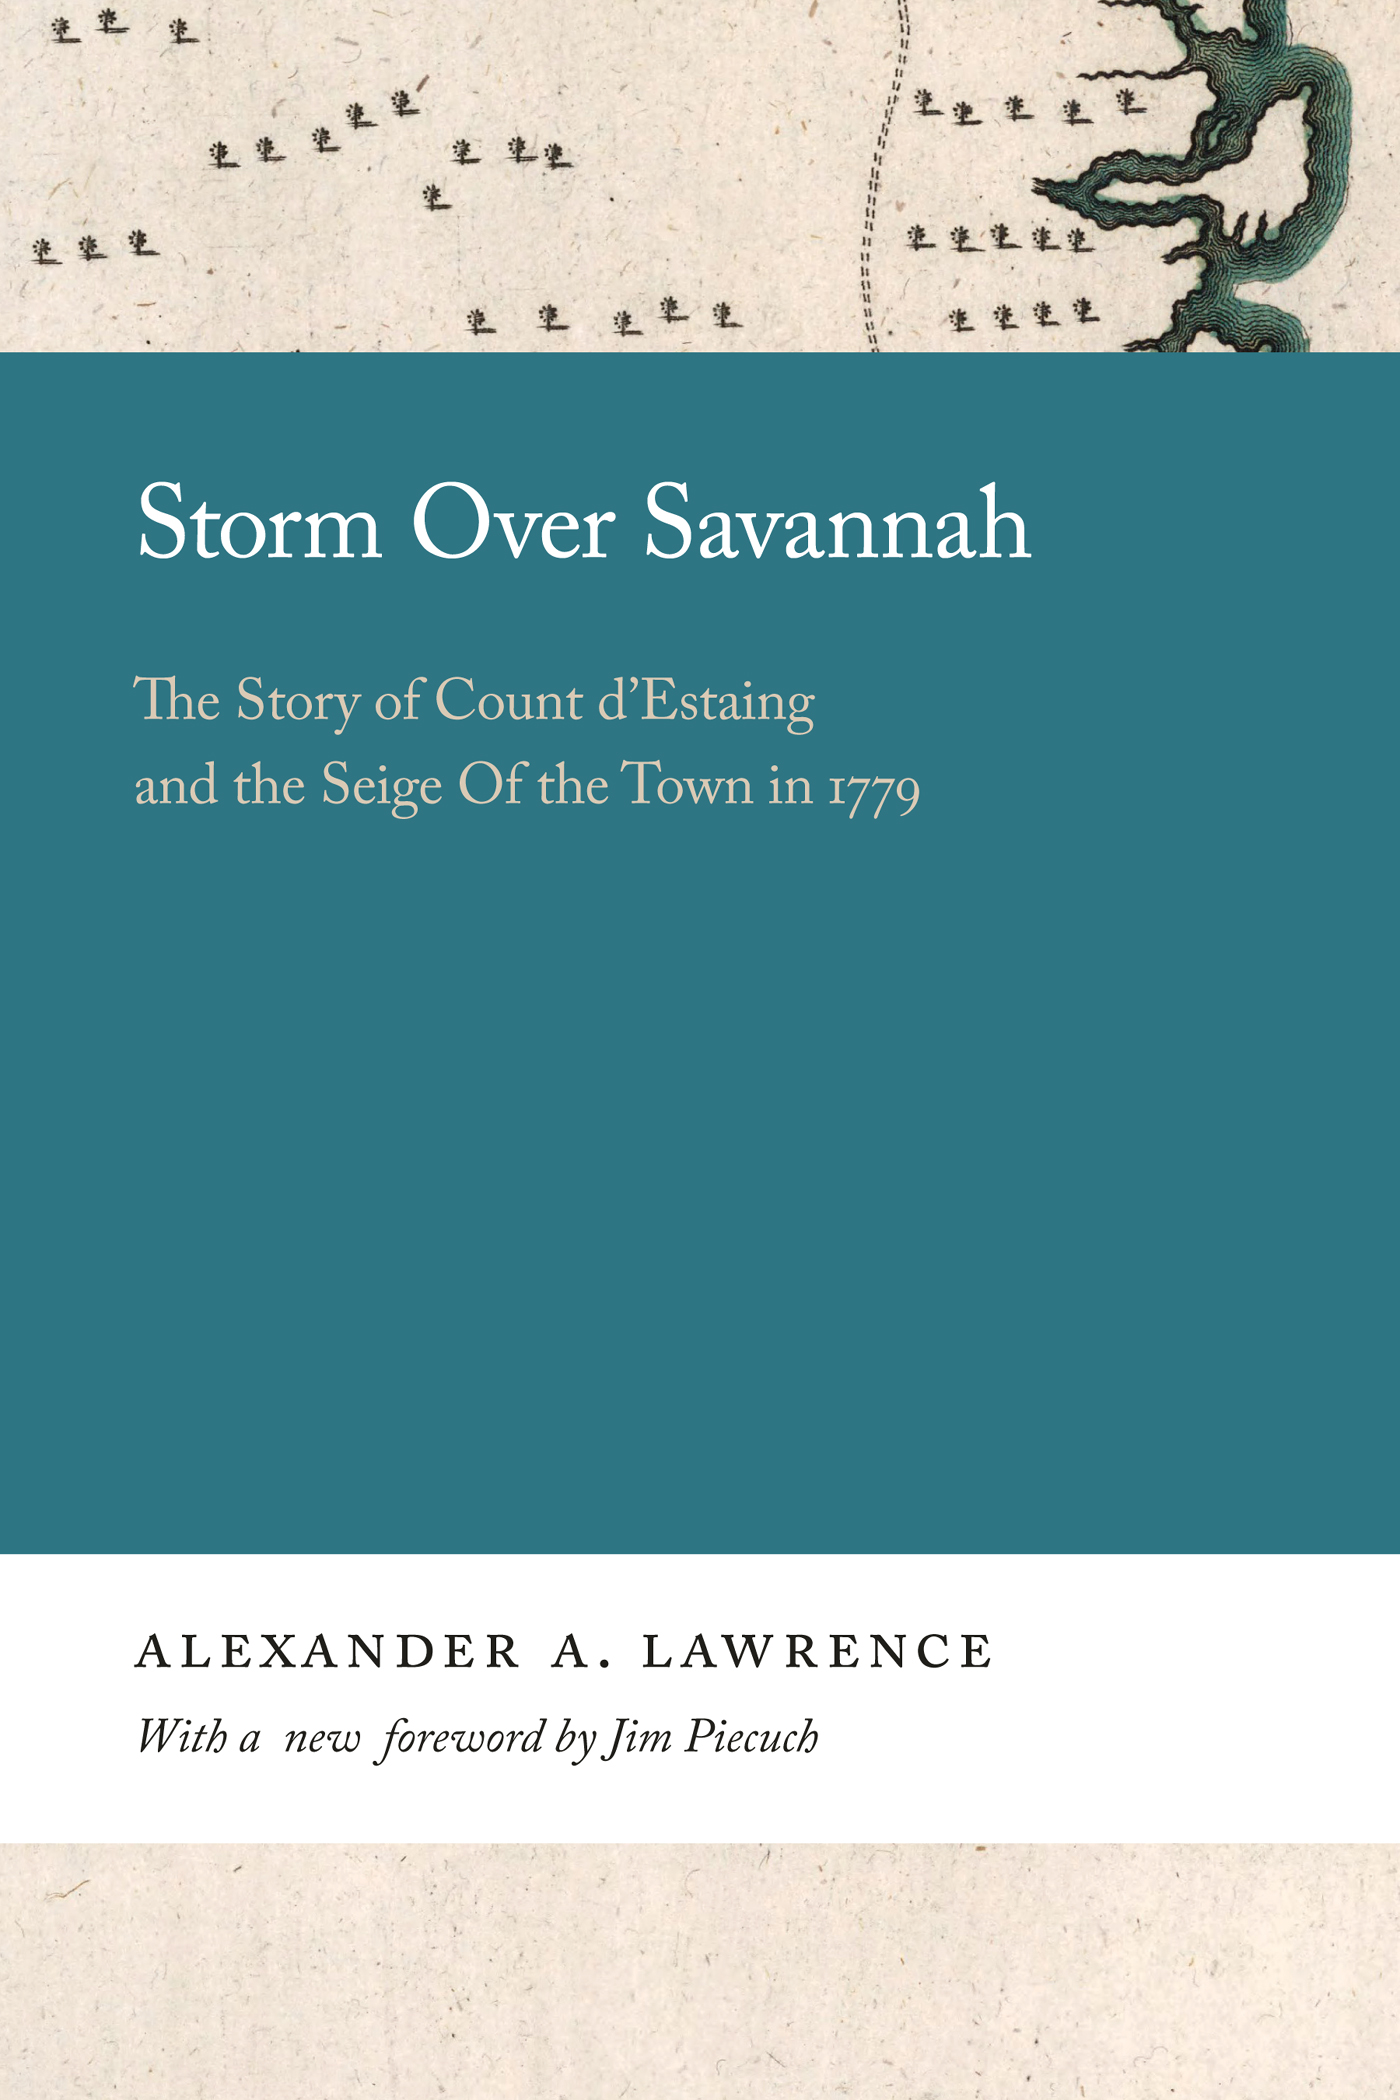 The cover page of the book “Storm Over Savannah.”